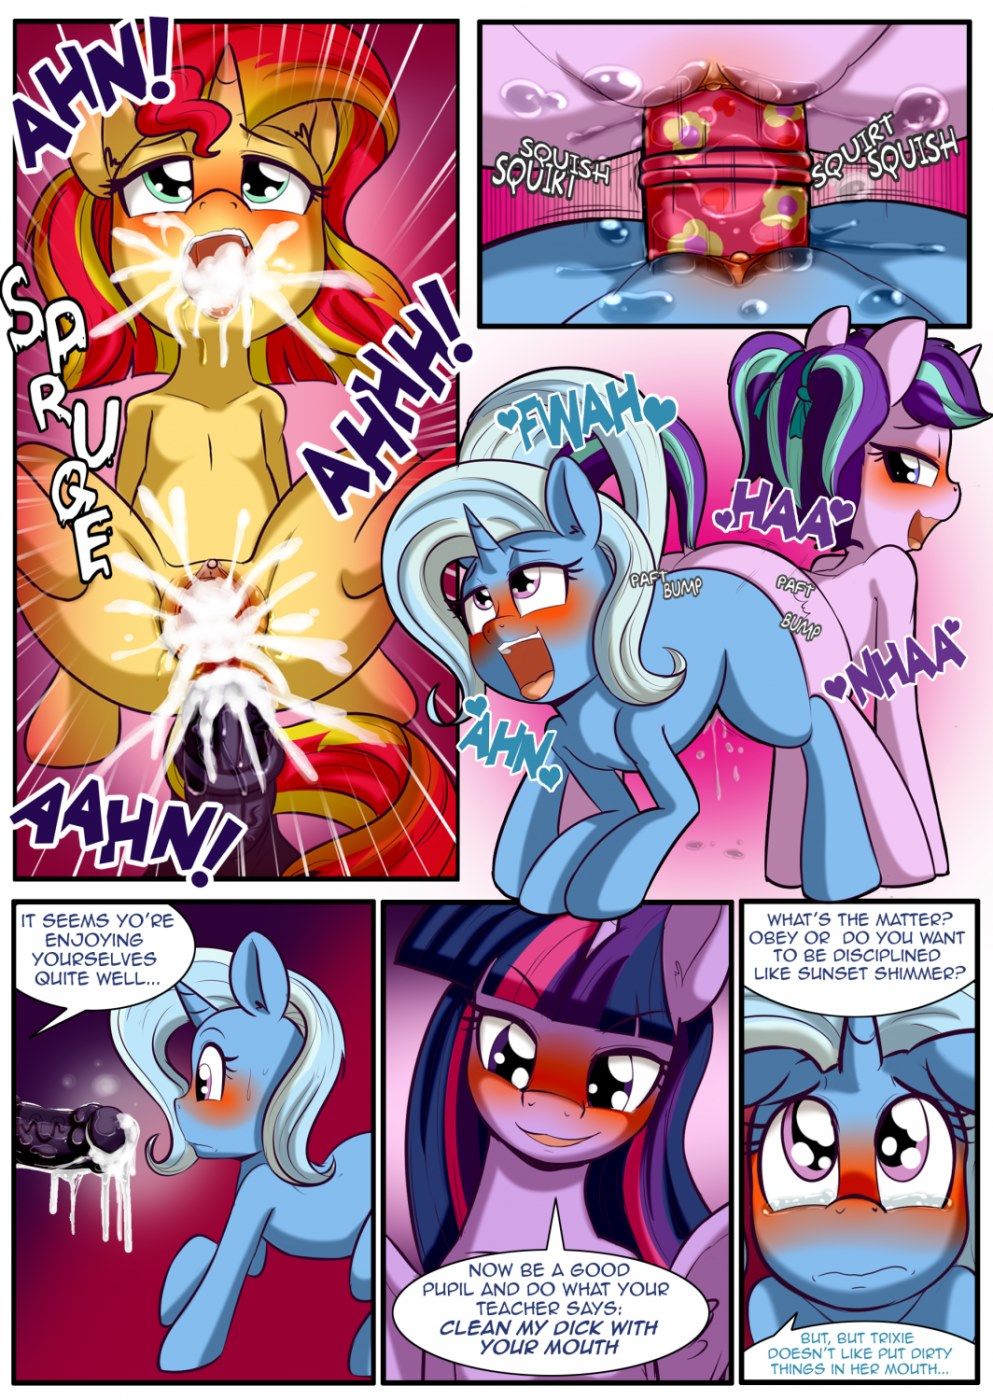 Back to Magic Kindergarten - Little Pony page 12